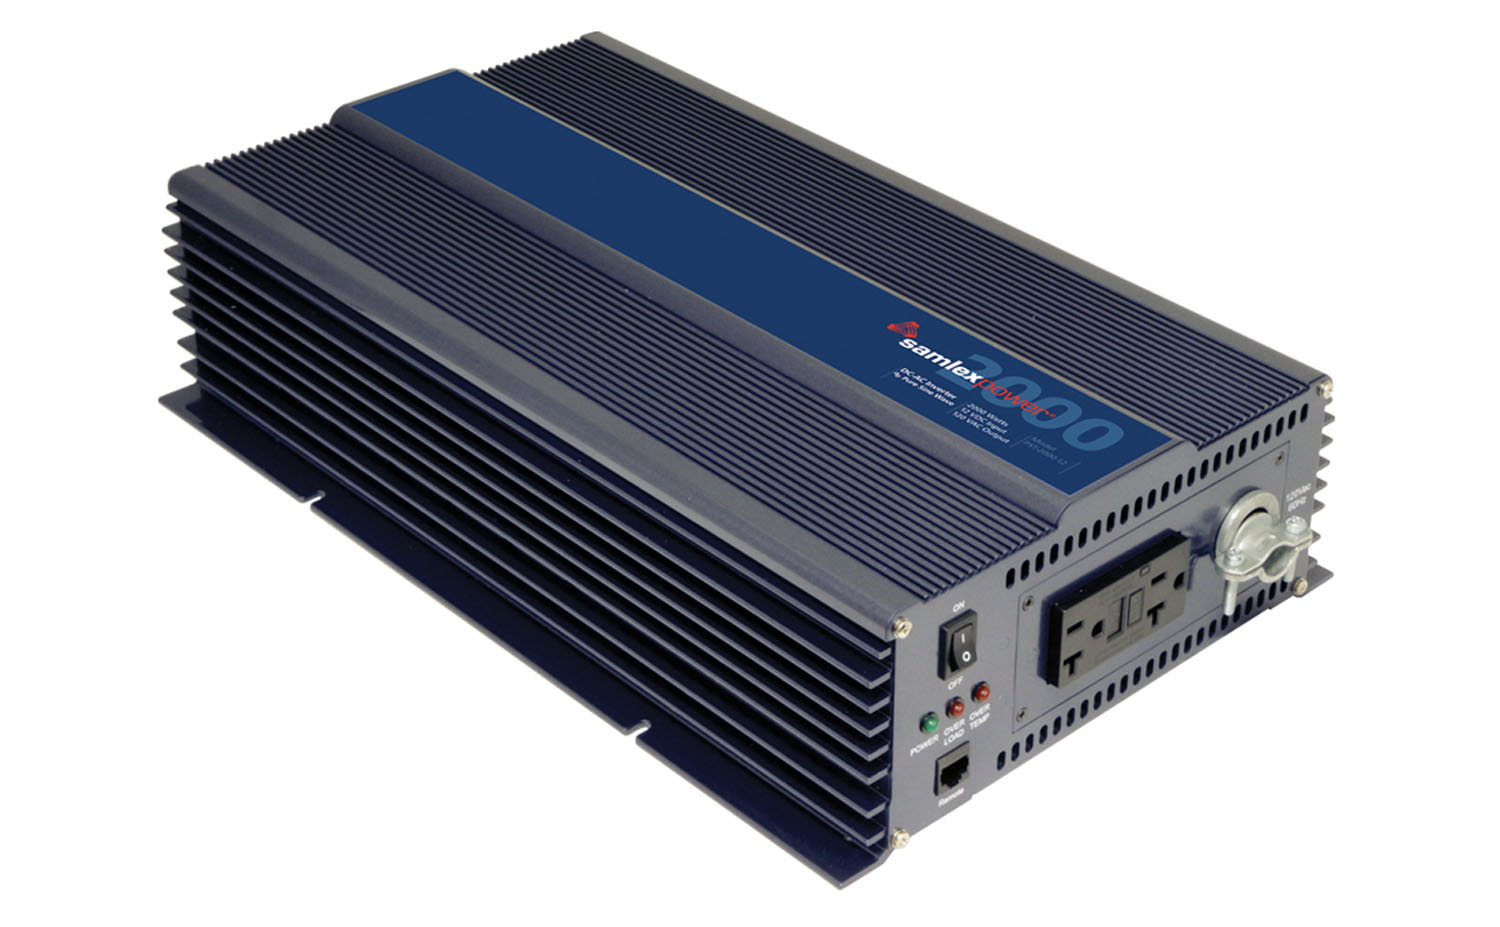 SAMLEX - PST200012-NR 2,000/3,500 WATT HIGH EFFICIENCY PURE SIGN WAVE INVERTER & 2 GFCI AC OUTLETS -WITHOUT REMOTE PORT